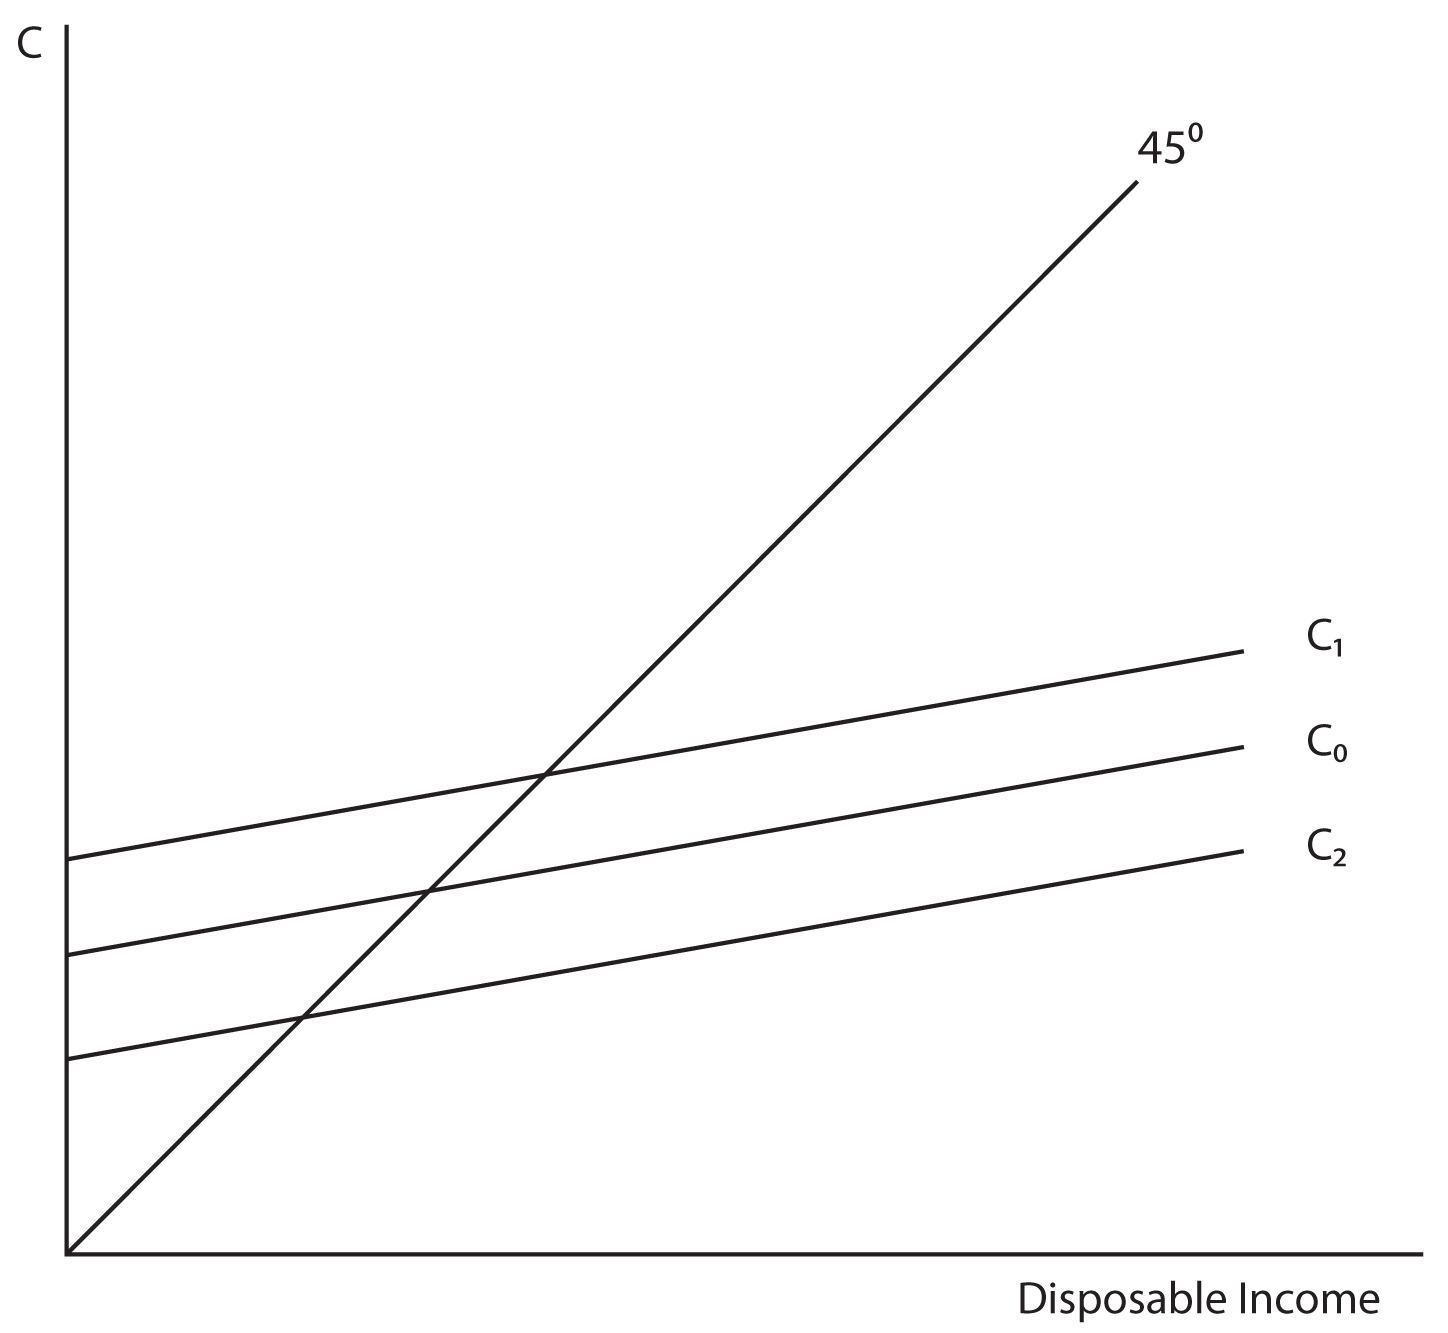 Image 6.04. This image is made up of one graph. It depicts Disposable Income on the X axis and C on the Y axis. There is a line extending from the origin in an increasing slope of 45 degrees. This line is labeled 45 degrees. There are three lines, which are parallel to each other and are separated equally, that extend from the lower half of the Y axis in an increasing slope that is less than a 45 degree angle. The line closest to the origin on the Y axis is labeled C subscript 2. The middle line is labeled C subscript 0. The line farthest from the origin on the Y axis is labeled C subscript 1.